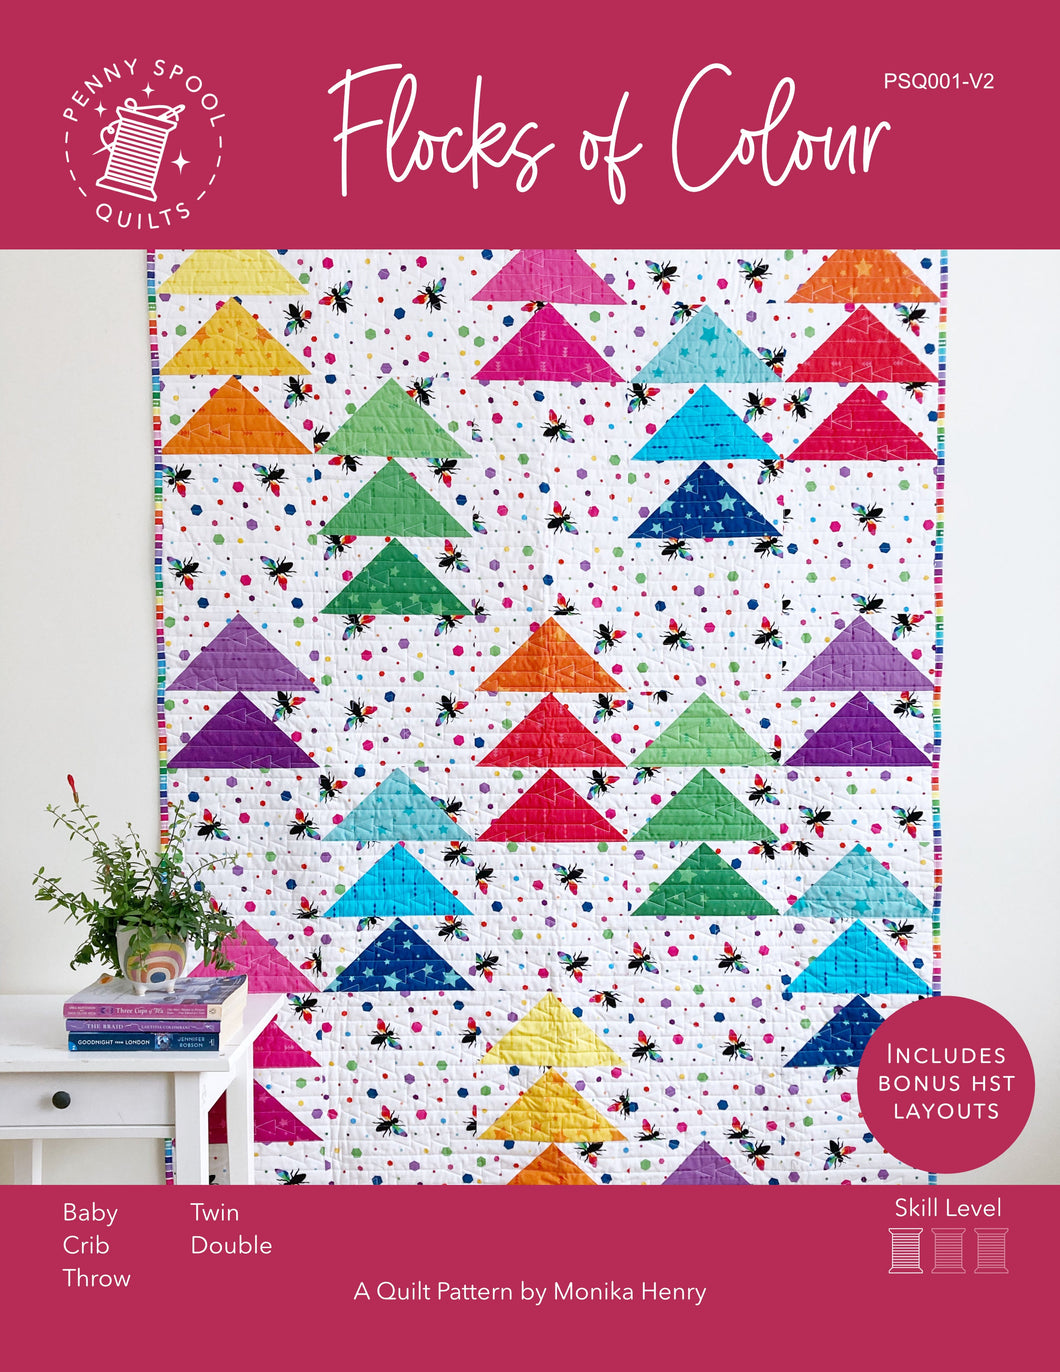 Flocks of Colour Quilt Pattern - PRINTED PATTERN